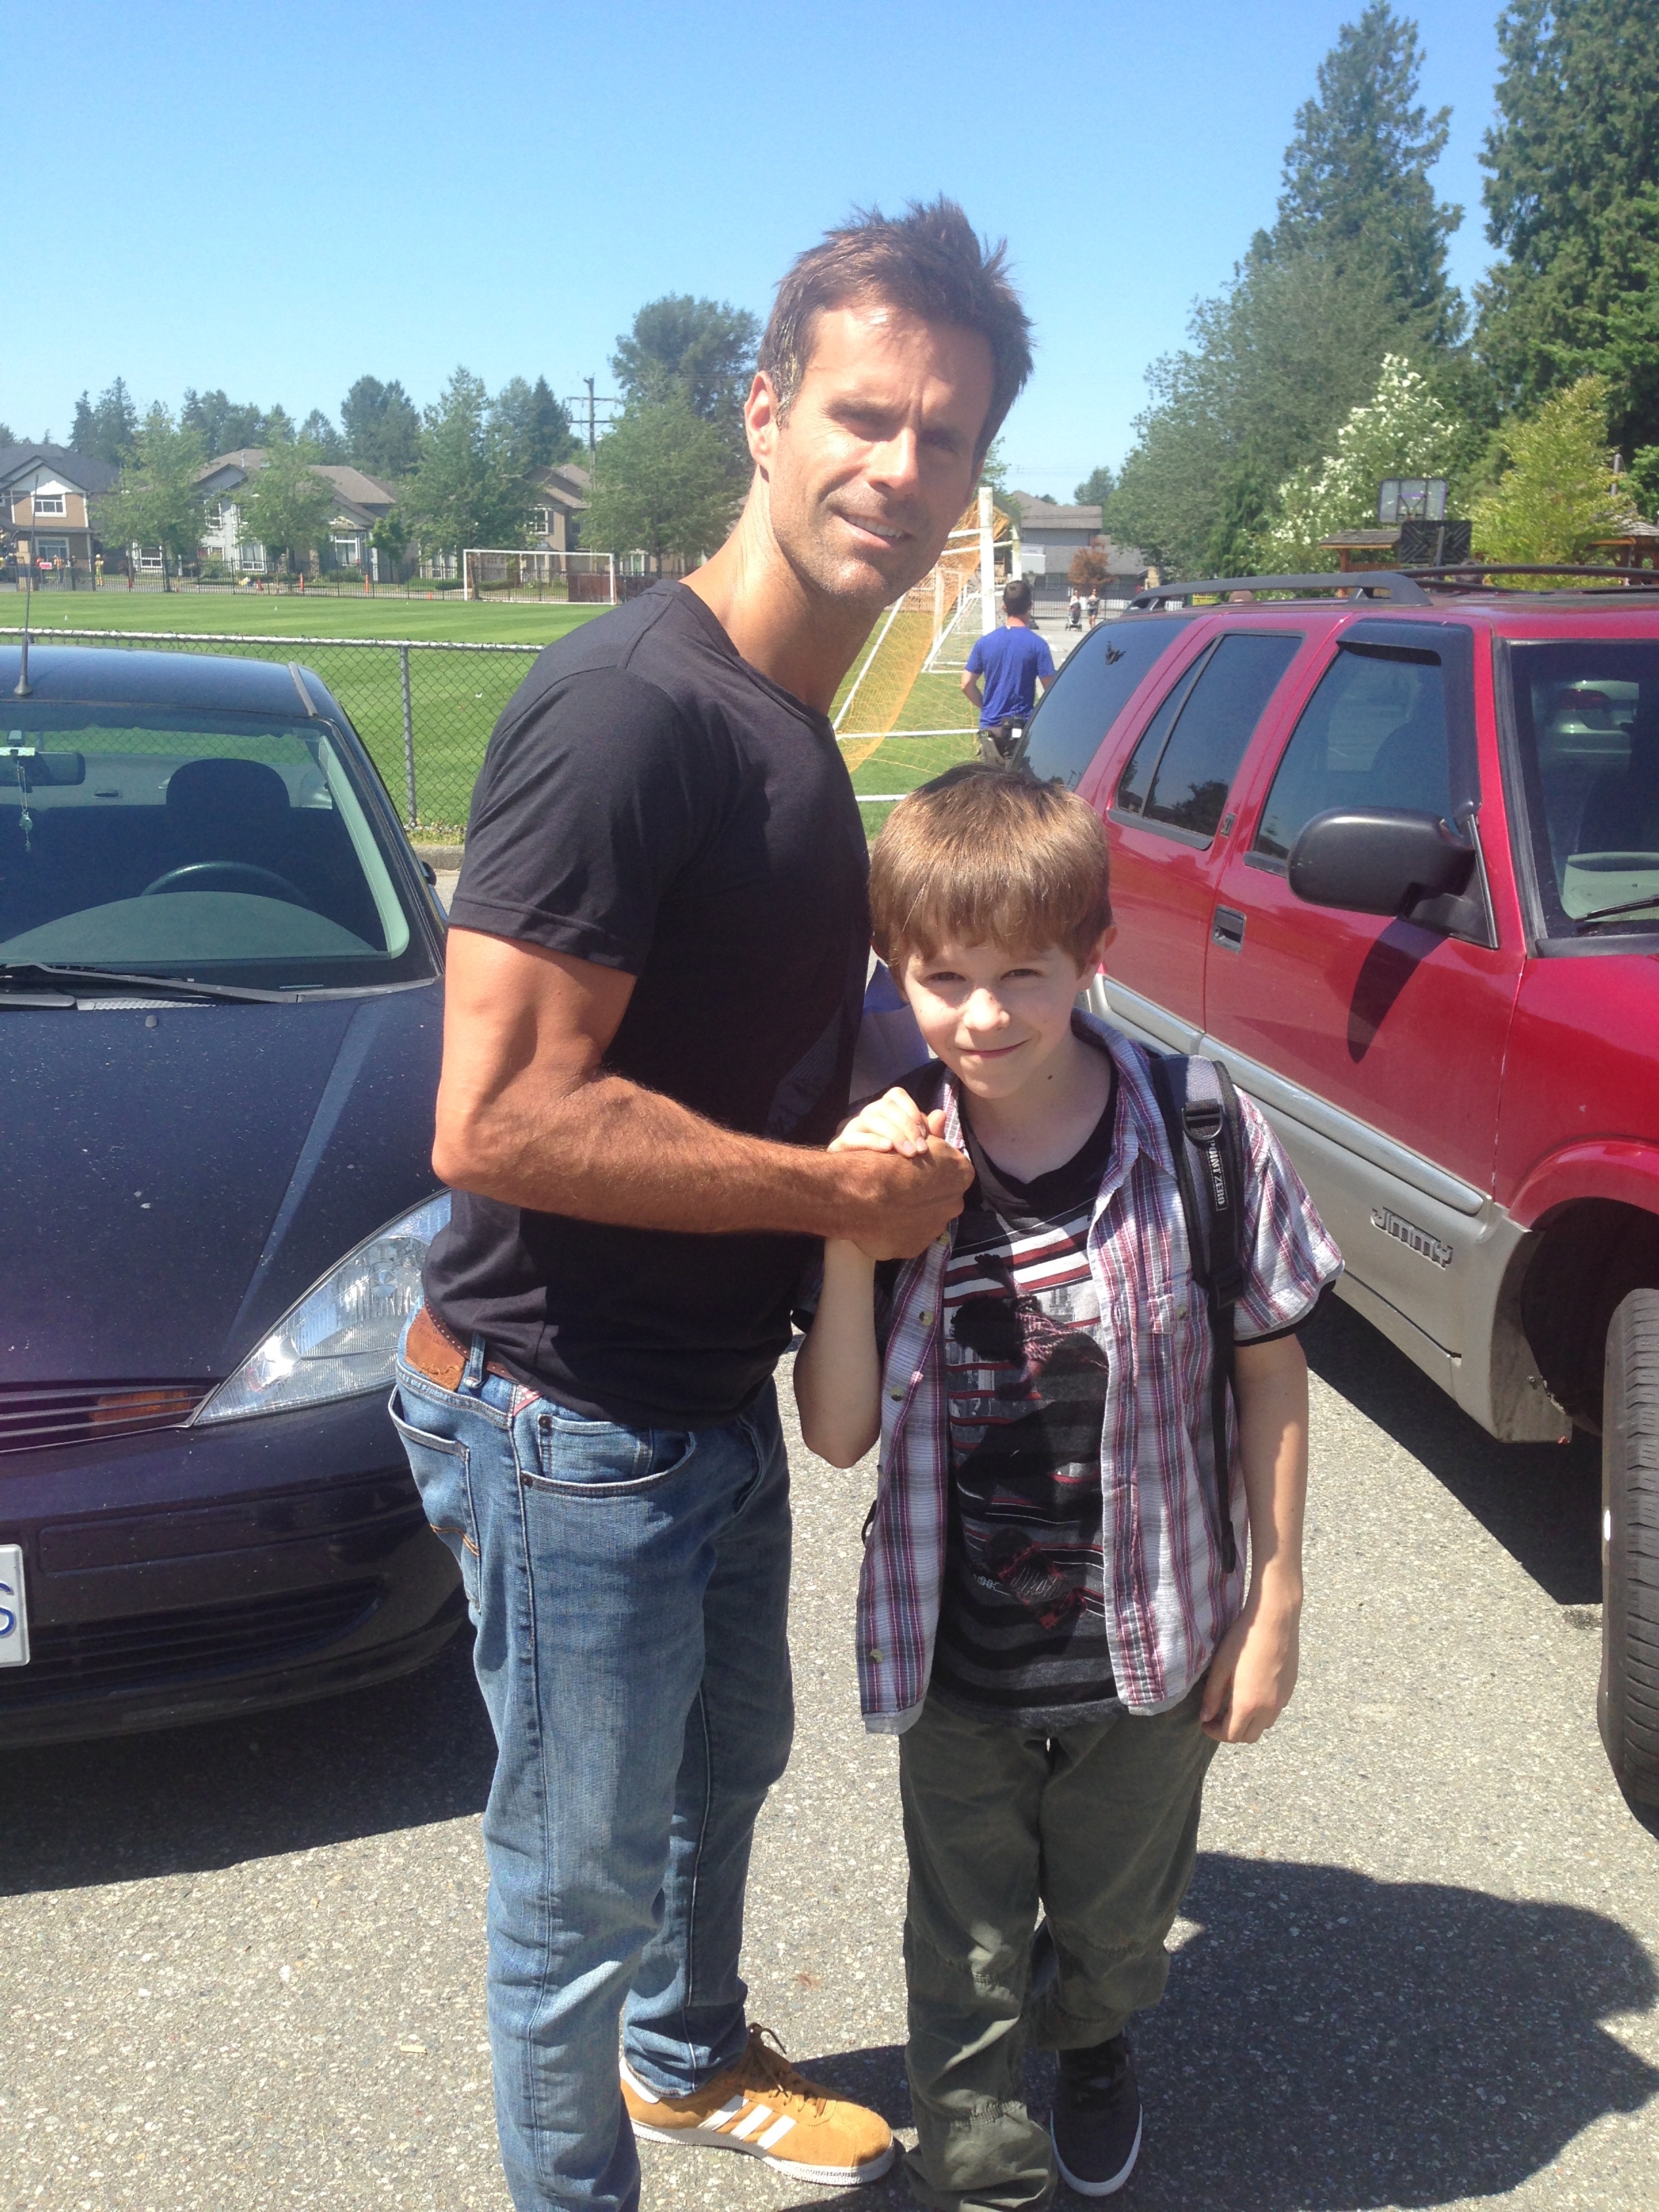 With Cameron Mathison on the set of Along Came a Nanny